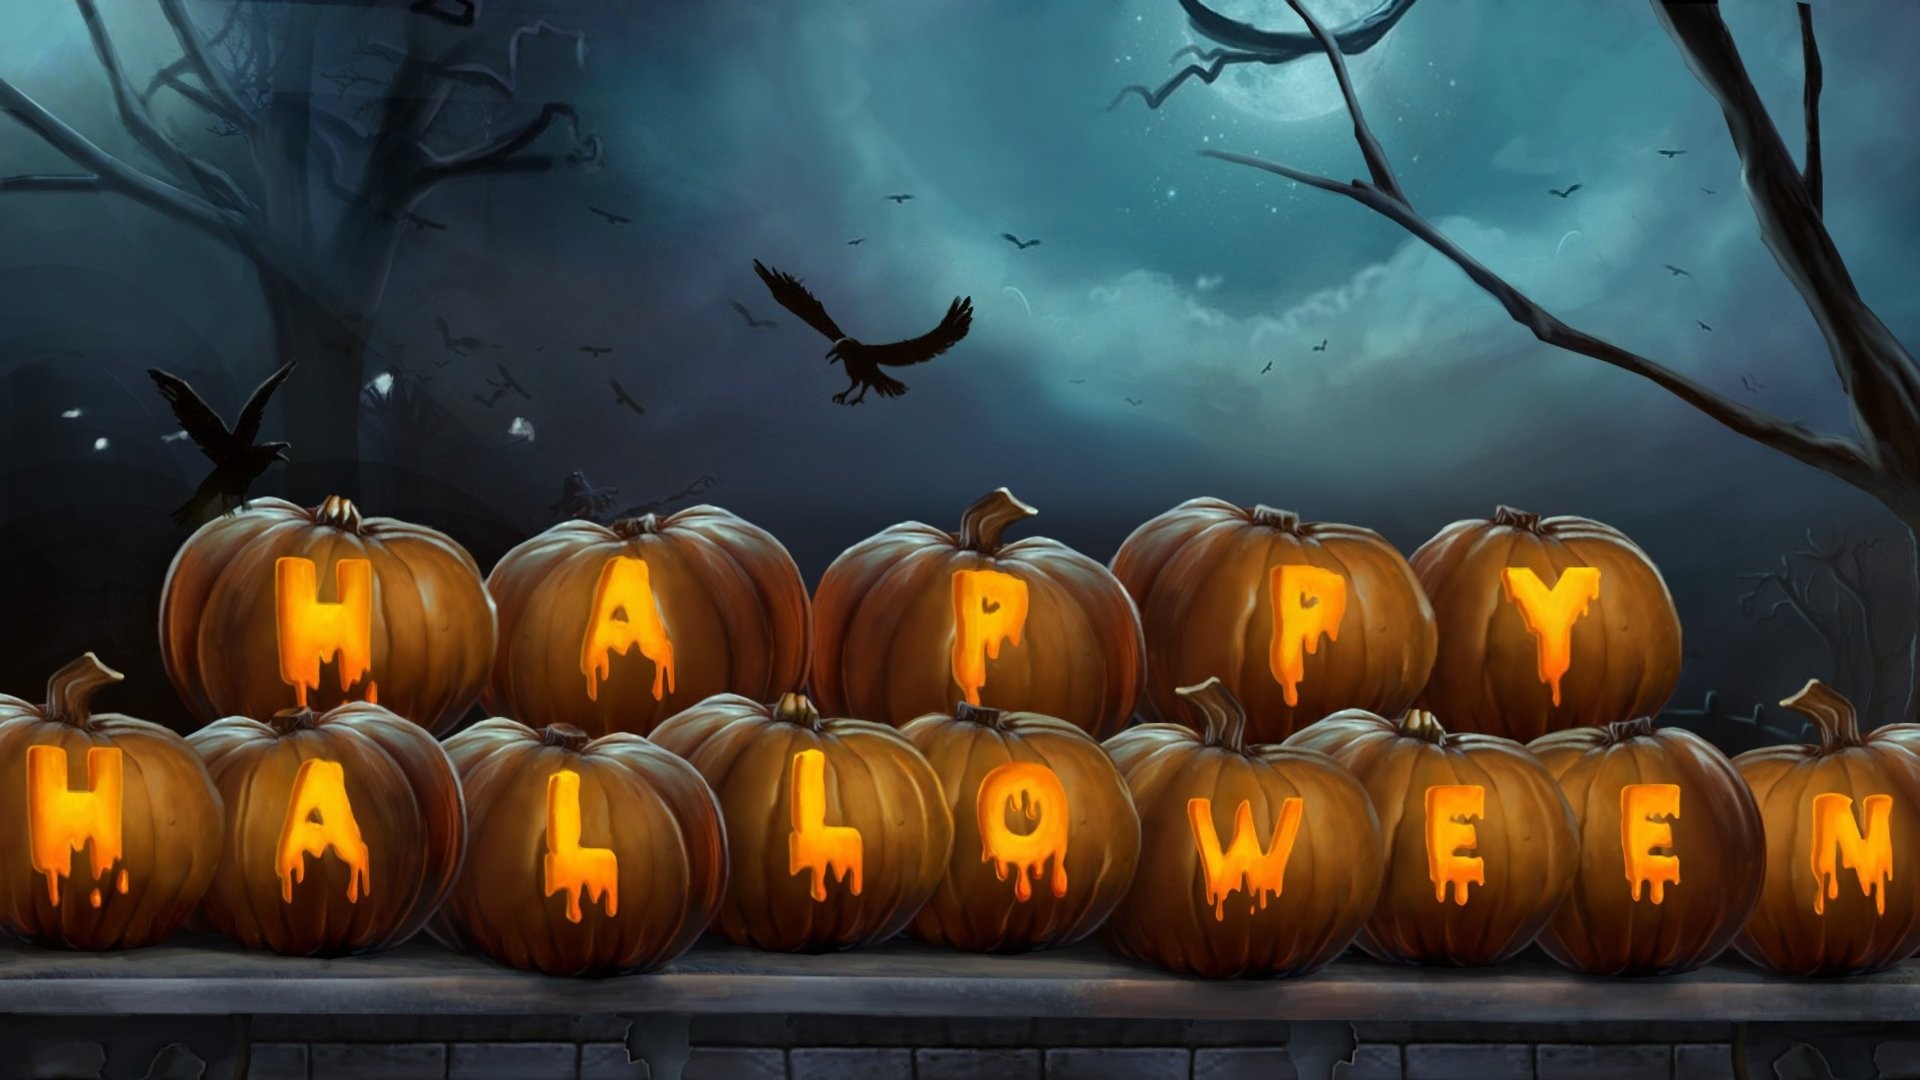 Best Cute Halloween Wallpaper With high-resolution 1920X1080 pixel. You can use this wallpaper for your Windows and Mac OS computers as well as your Android and iPhone smartphones